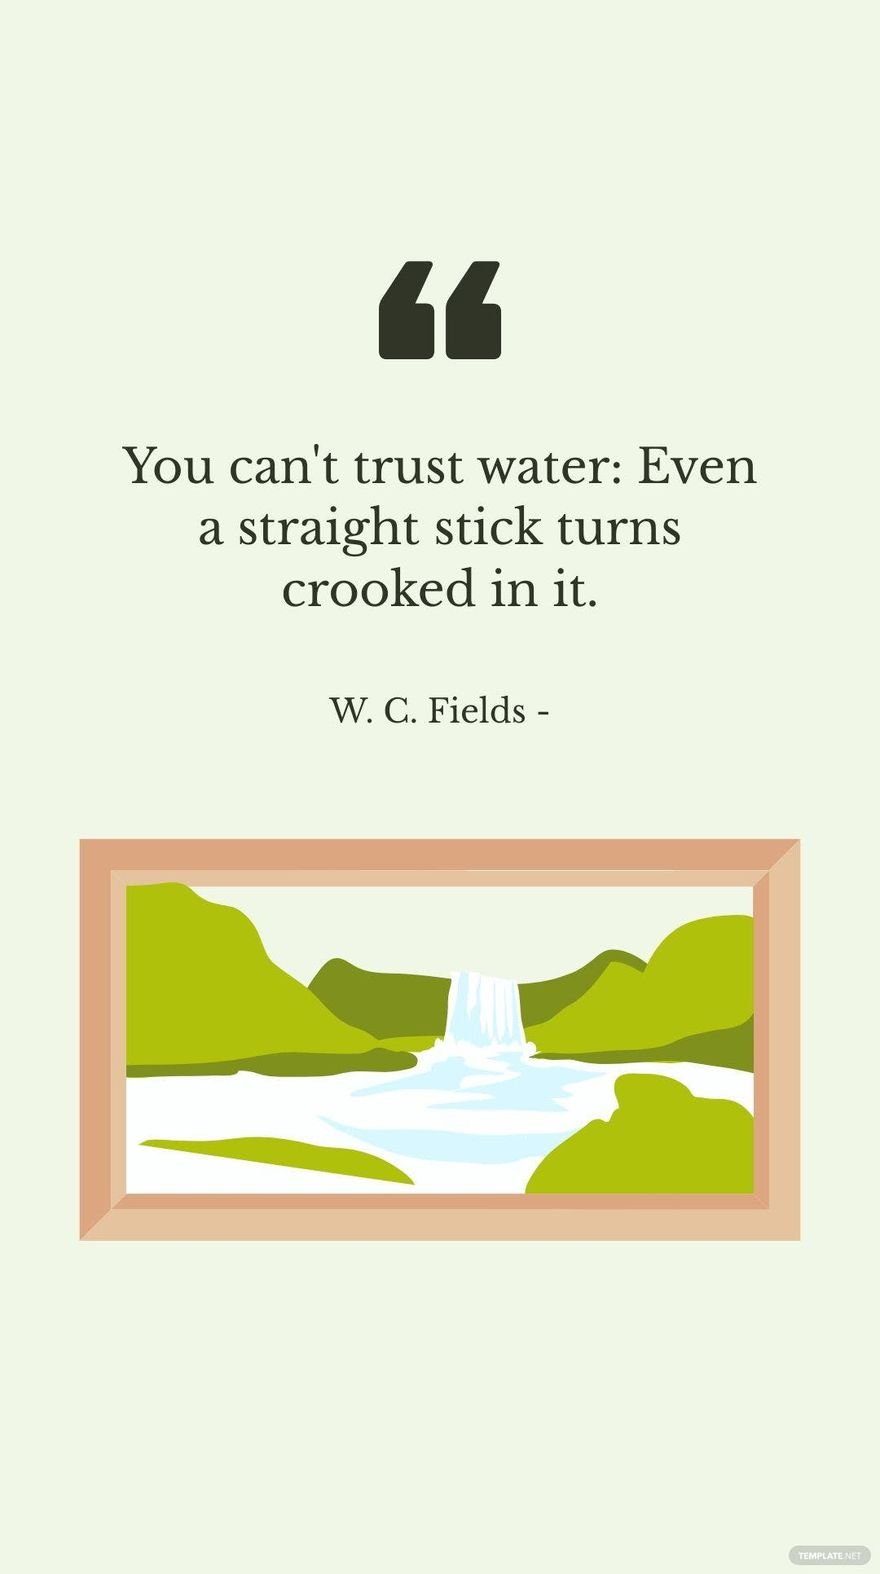 W. C. Fields - You can't trust water: Even a straight stick turns crooked in it. in JPG